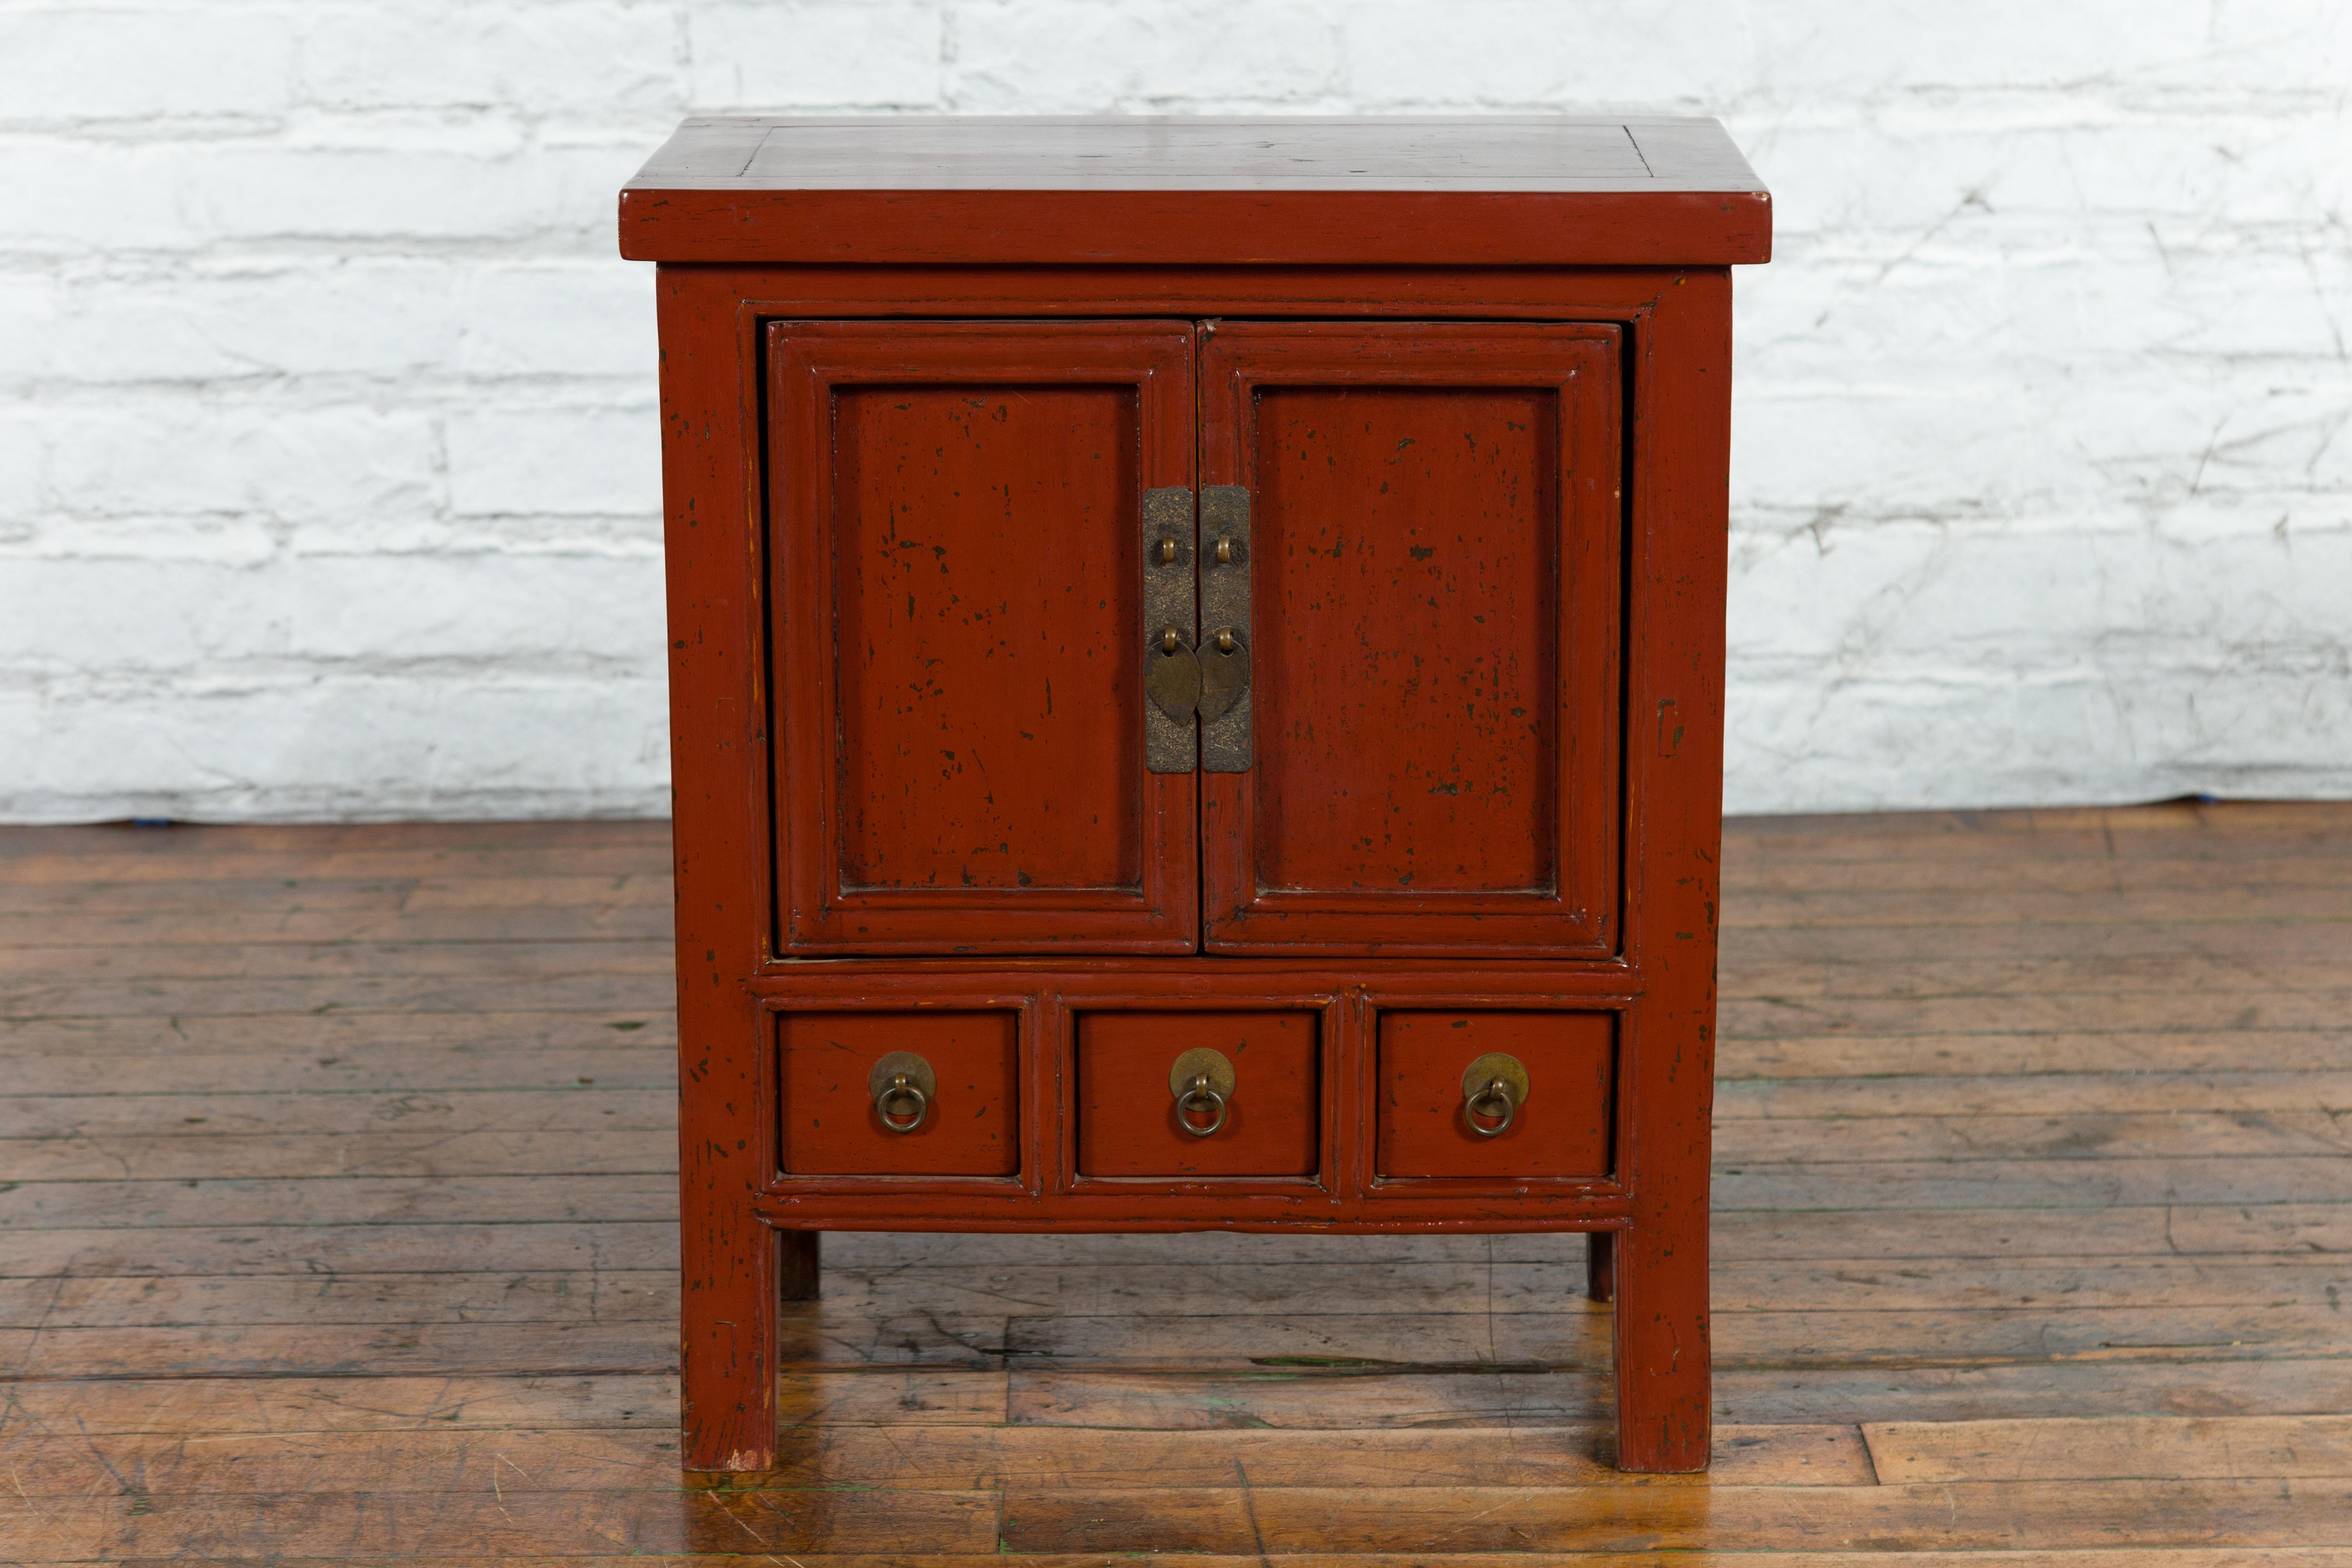 A Chinese Qing Dynasty period small red lacquered side cabinet from the 19th century, with three apothecary drawers. Created in China during the Qing Dynasty, this small red lacquer cabinet features a rectangular top with central board, sitting